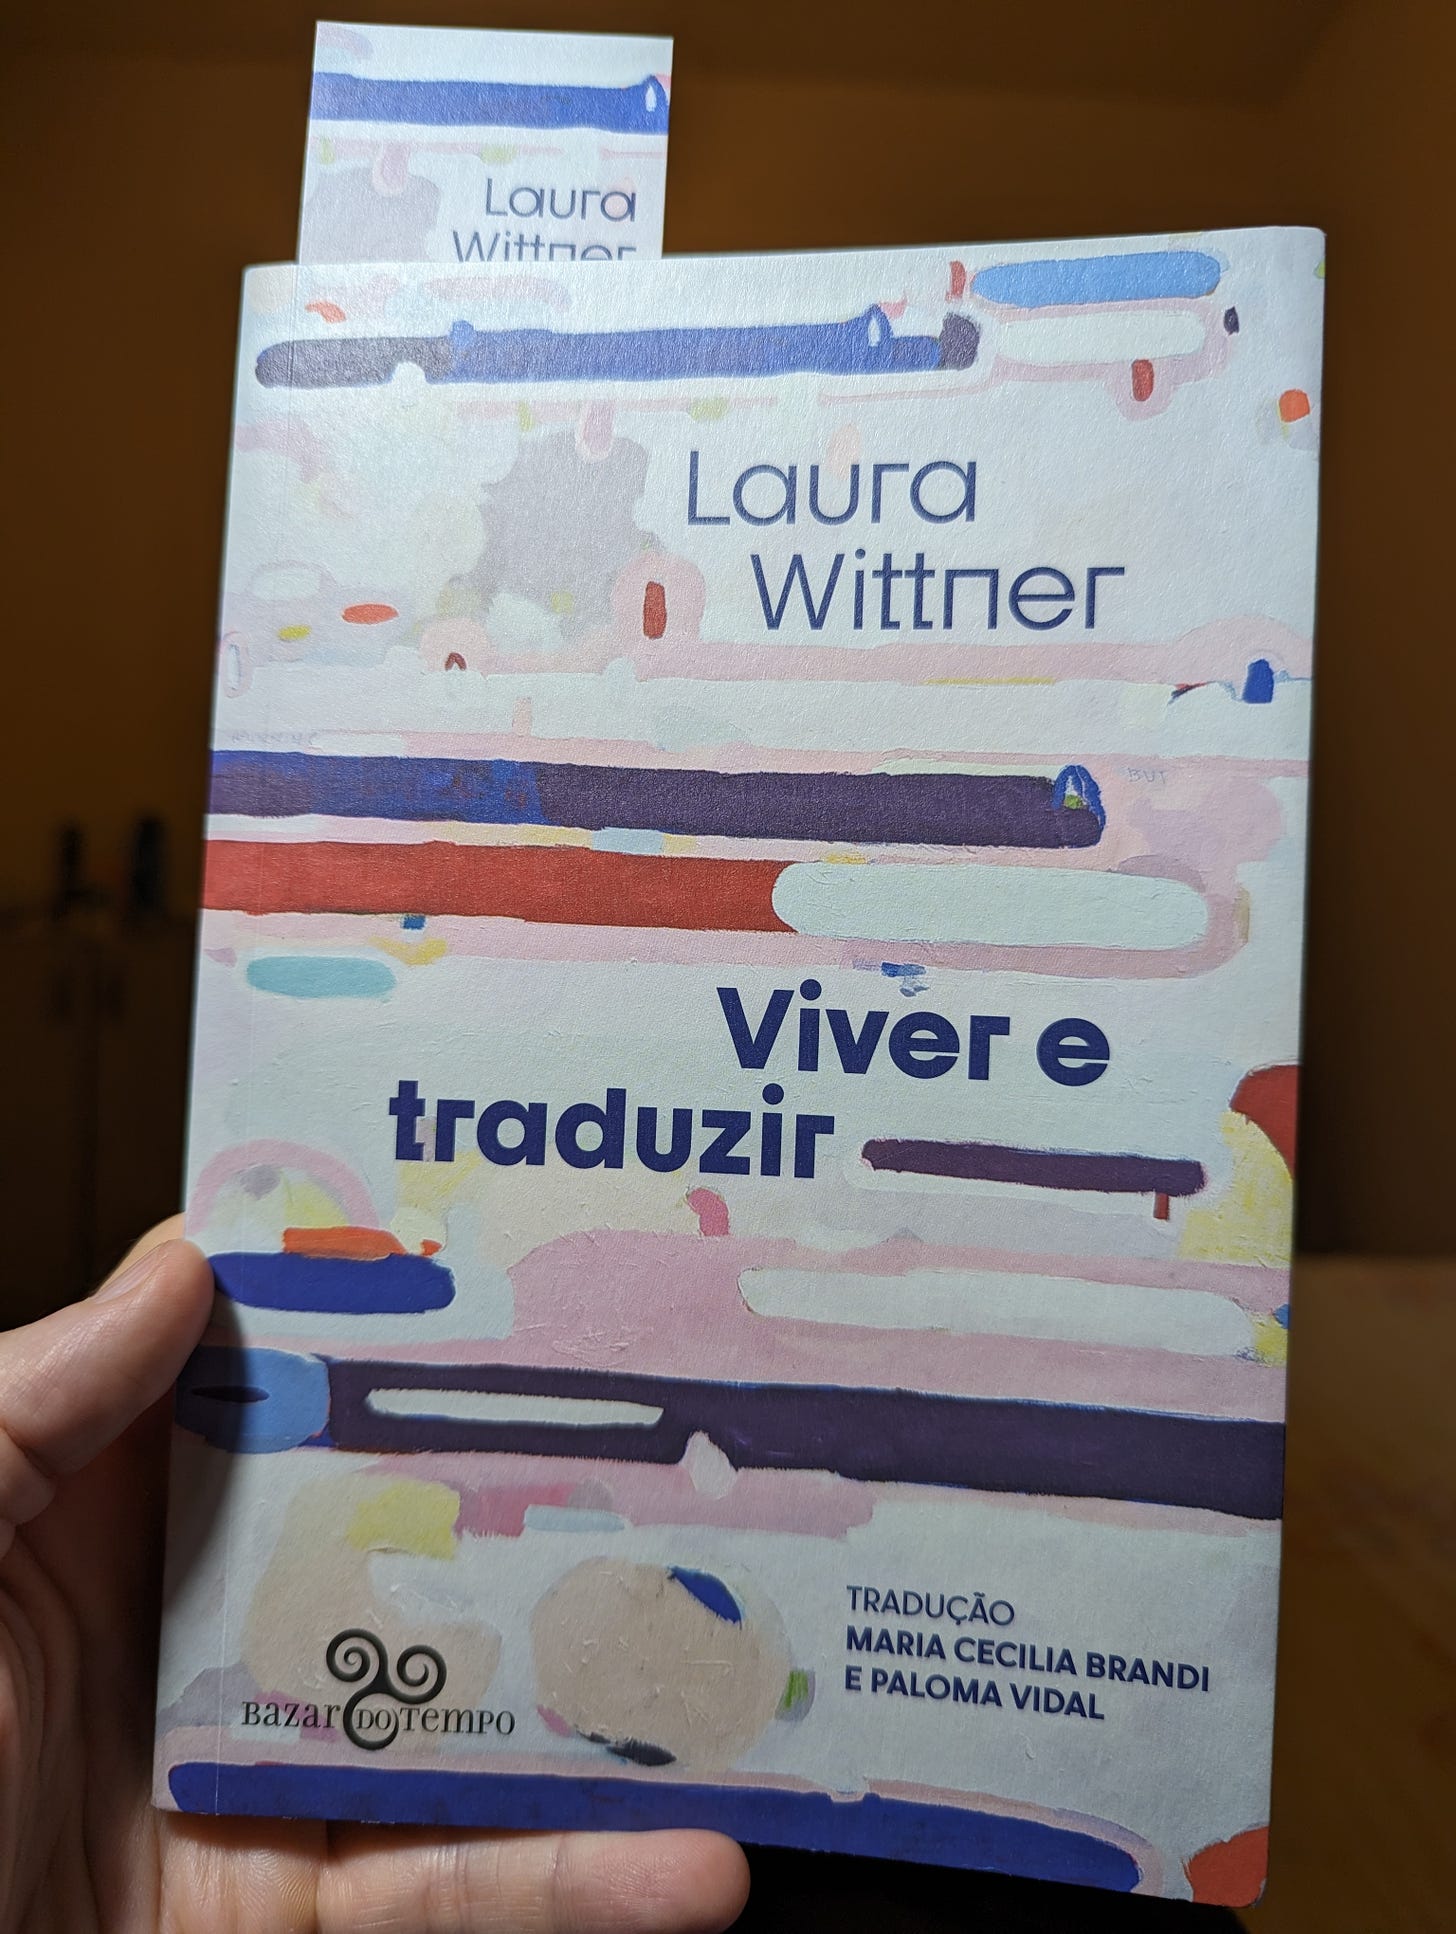 Cover of Laura Wittner's memoir "Viver e traduzir", translated into Brazilian Portuguese by translated by Maria Cecilia Brandi and Paloma Vidal